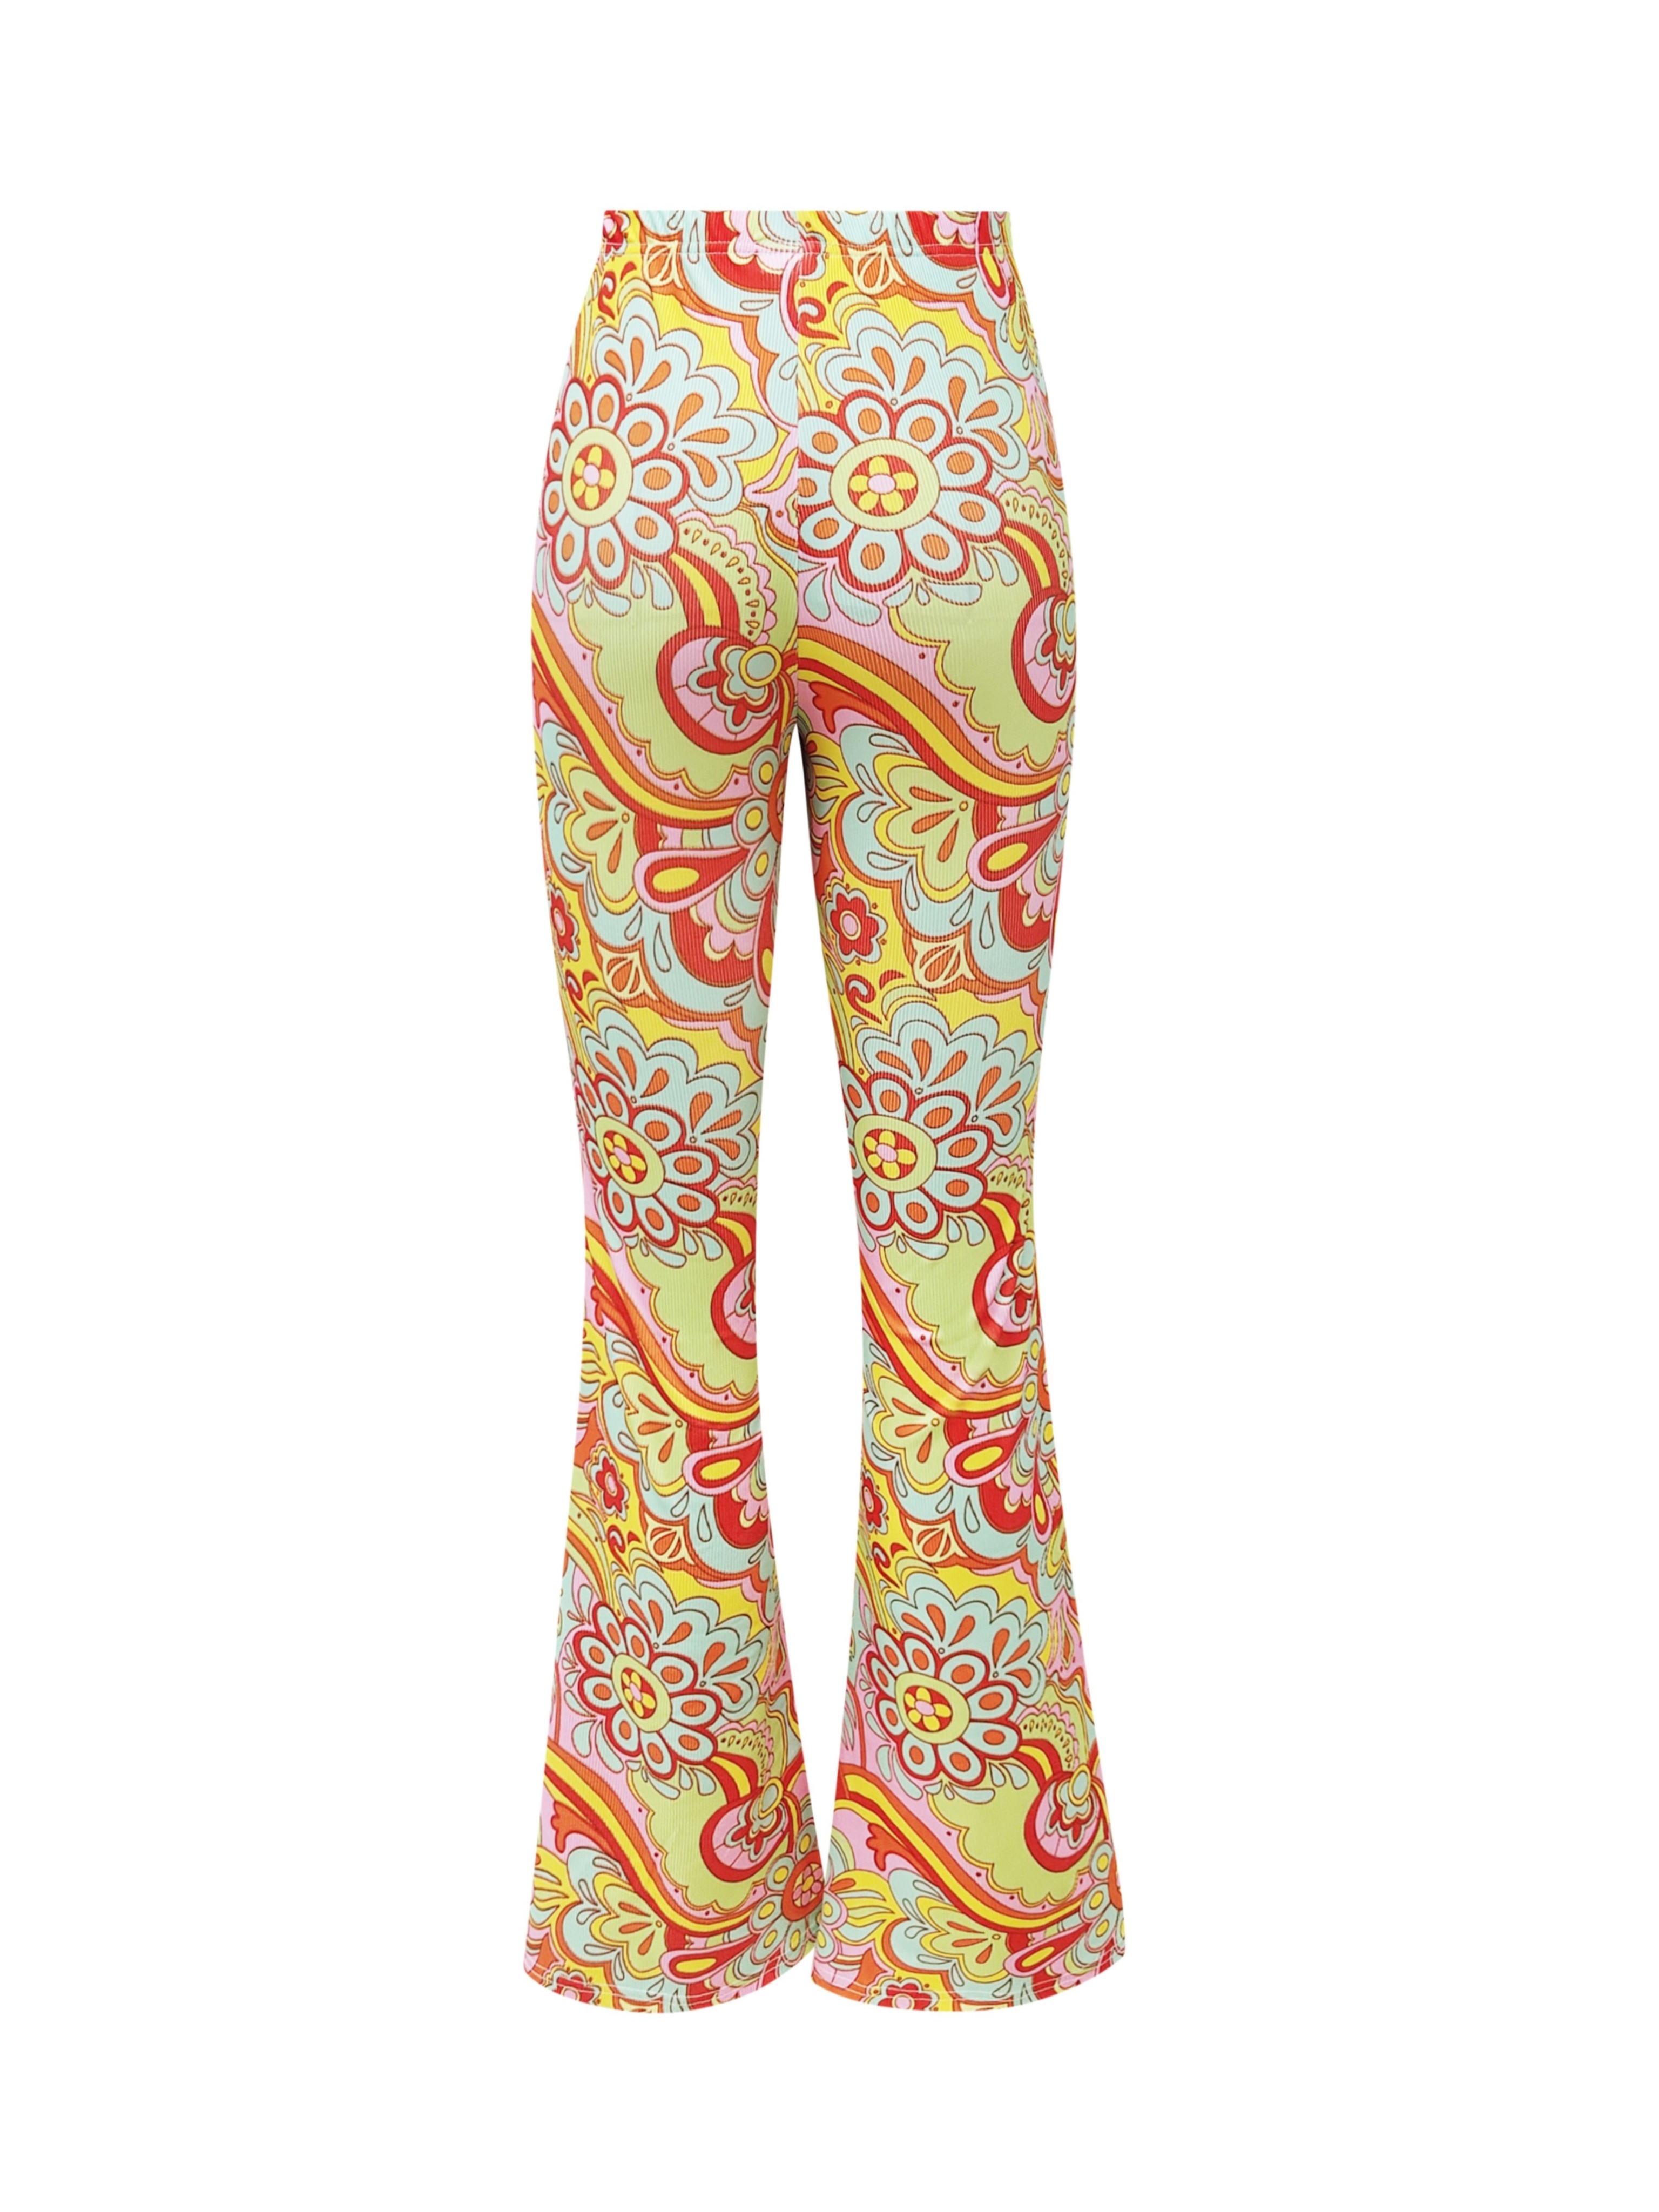  Flare Pants for Women Floral Bell Bottom 70s Hippie